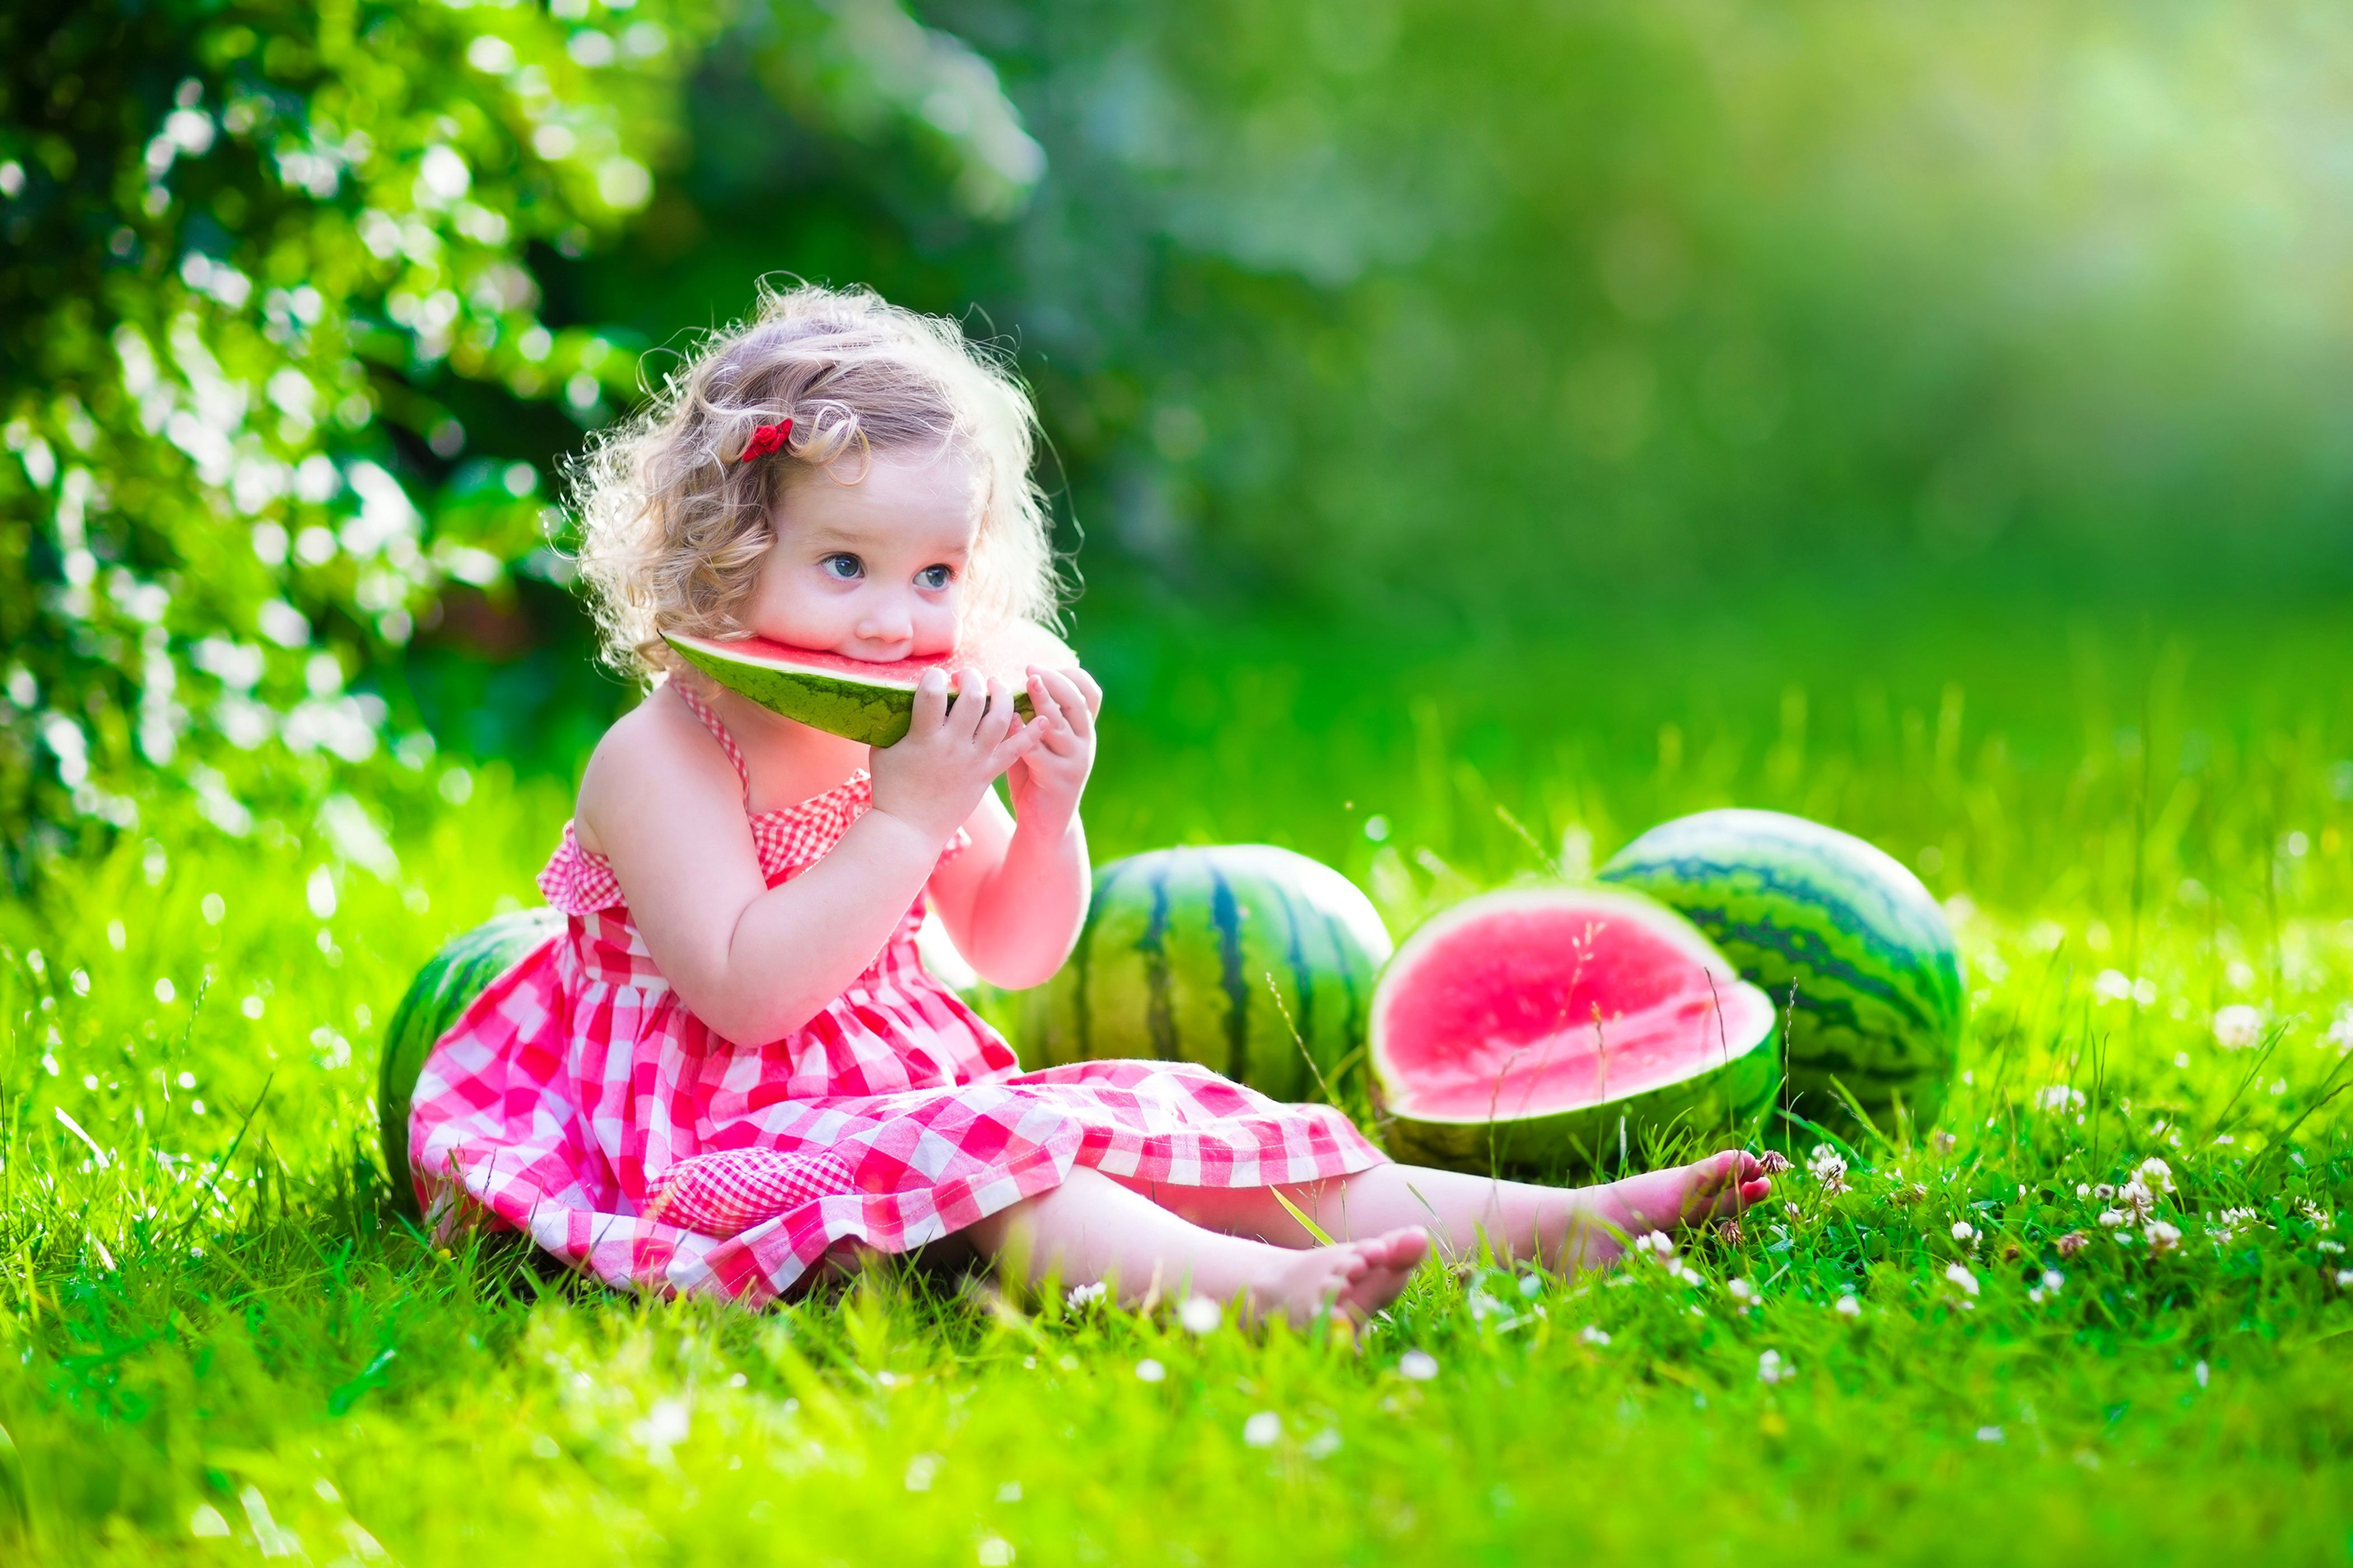 Cute Baby Girl Wallpaper HD Download For Desktop Mobile ×. Cute baby girl wallpaper, Baby girl wallpaper, Watermelon photo shoots